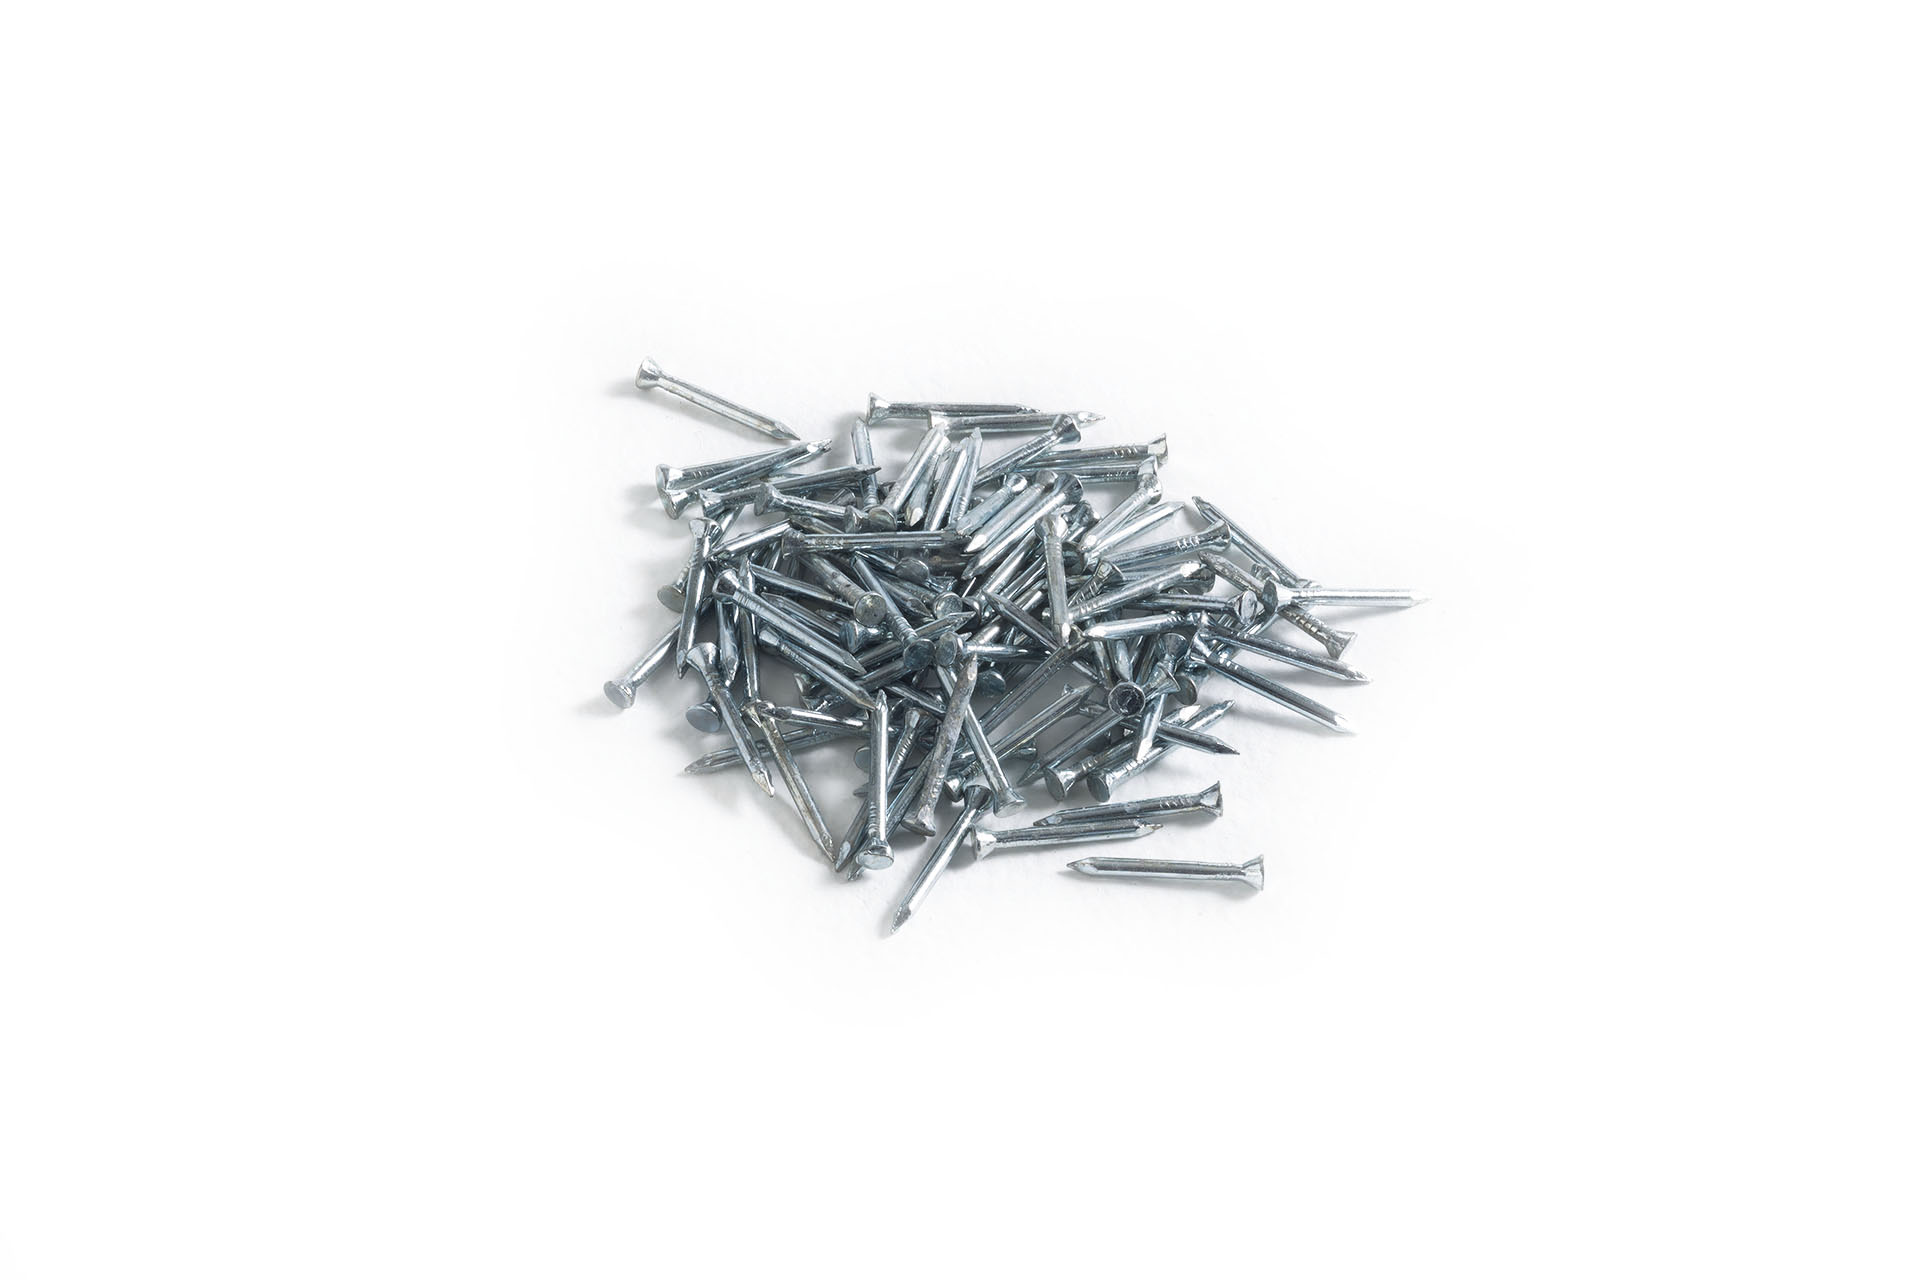 Accessory: nails for hammer for bituminous shingles